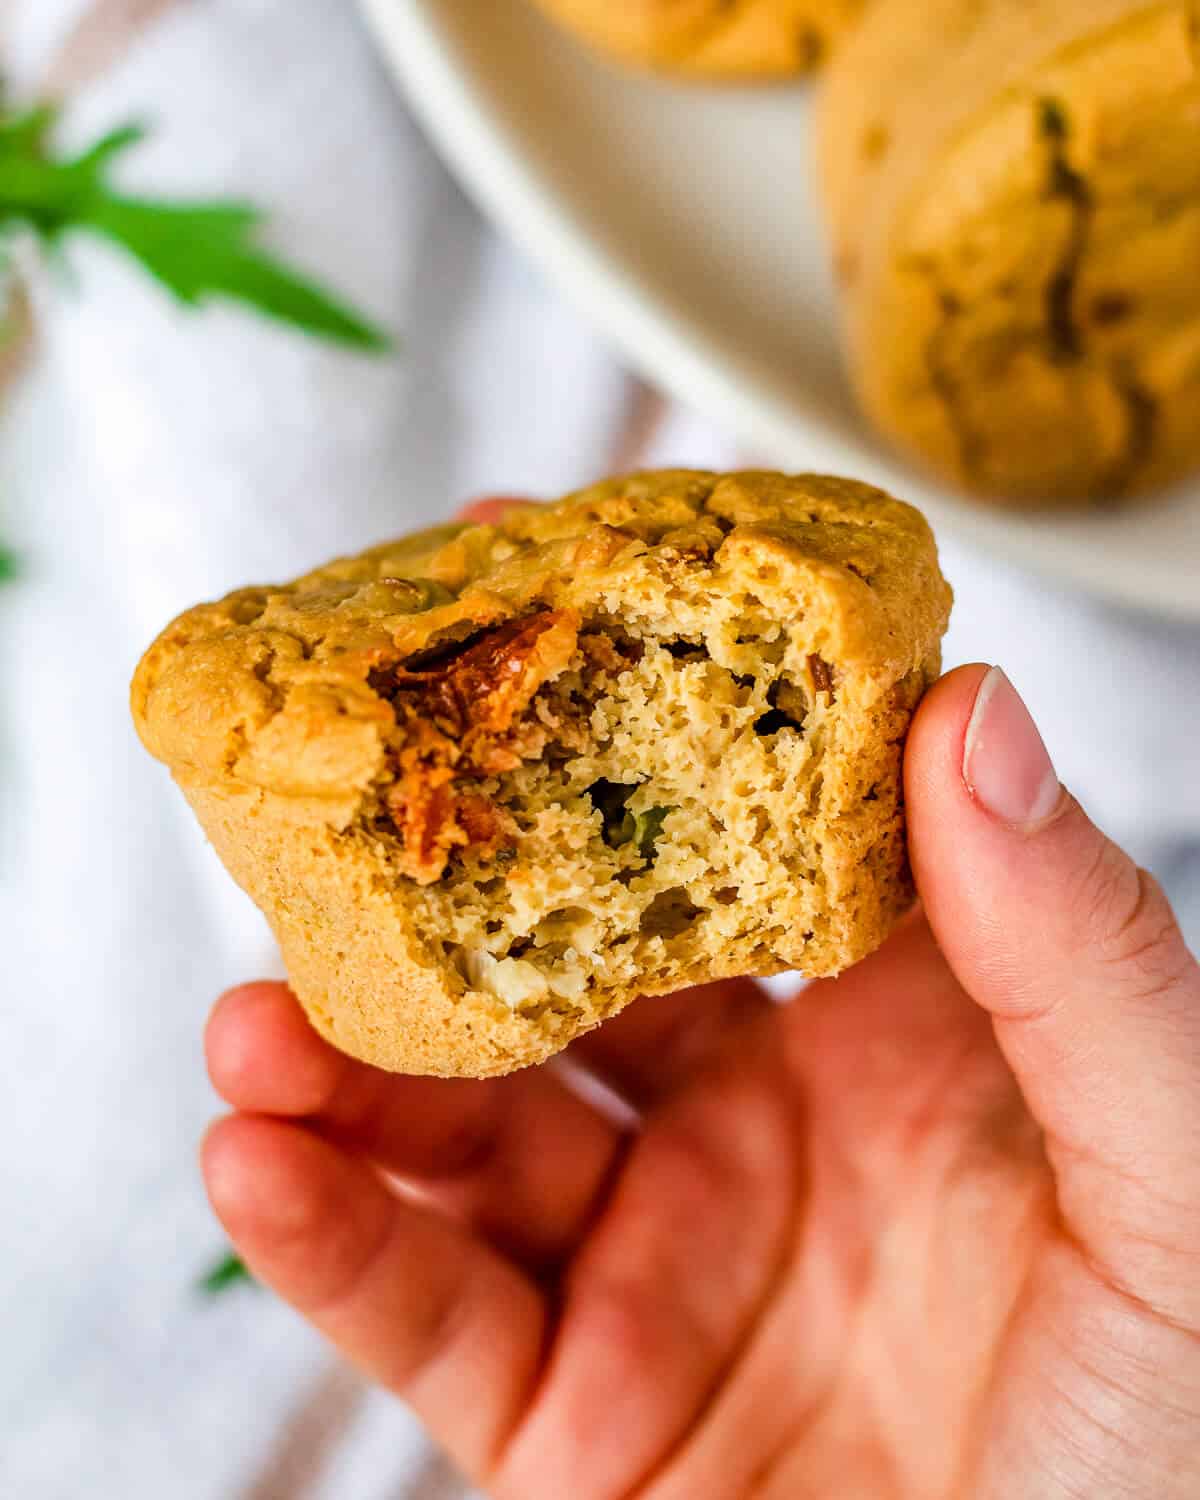 A hand holding a savoury chickpea flour muffin - a bite has been taken revealing the fluffy texture and a sun-dried tomato. There are more muffins on a plate in the background.